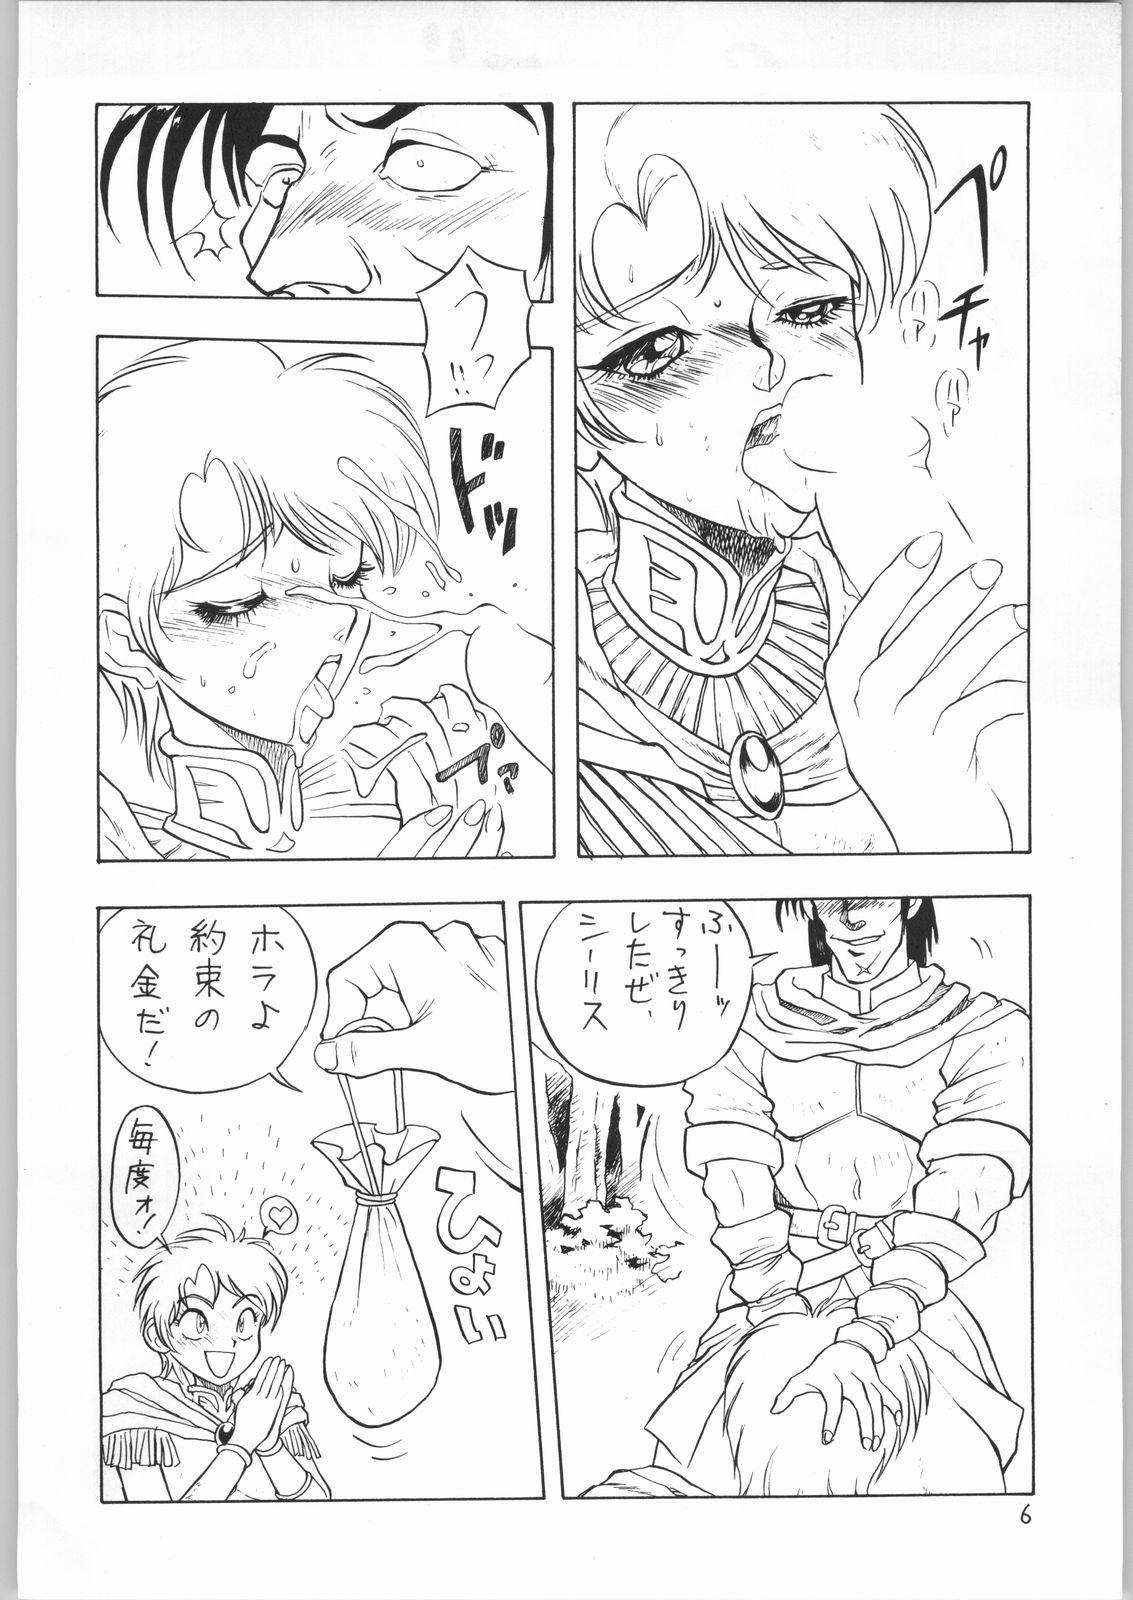 Movies Heroic Dreams - Record of lodoss war Str8 - Page 5